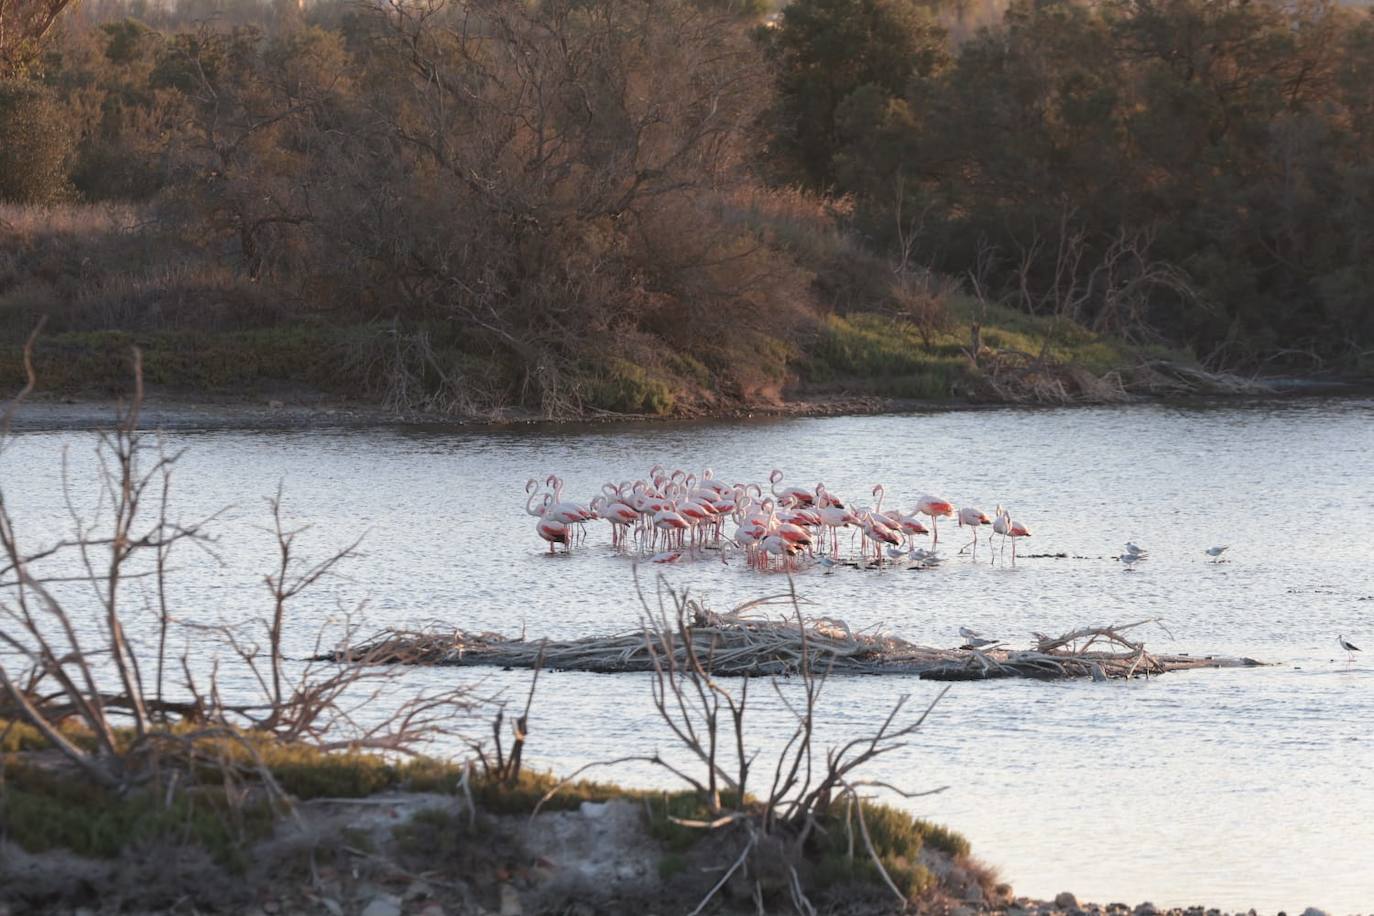 Picture special: flamingos arrive at mouth of river in middle of Malaga city